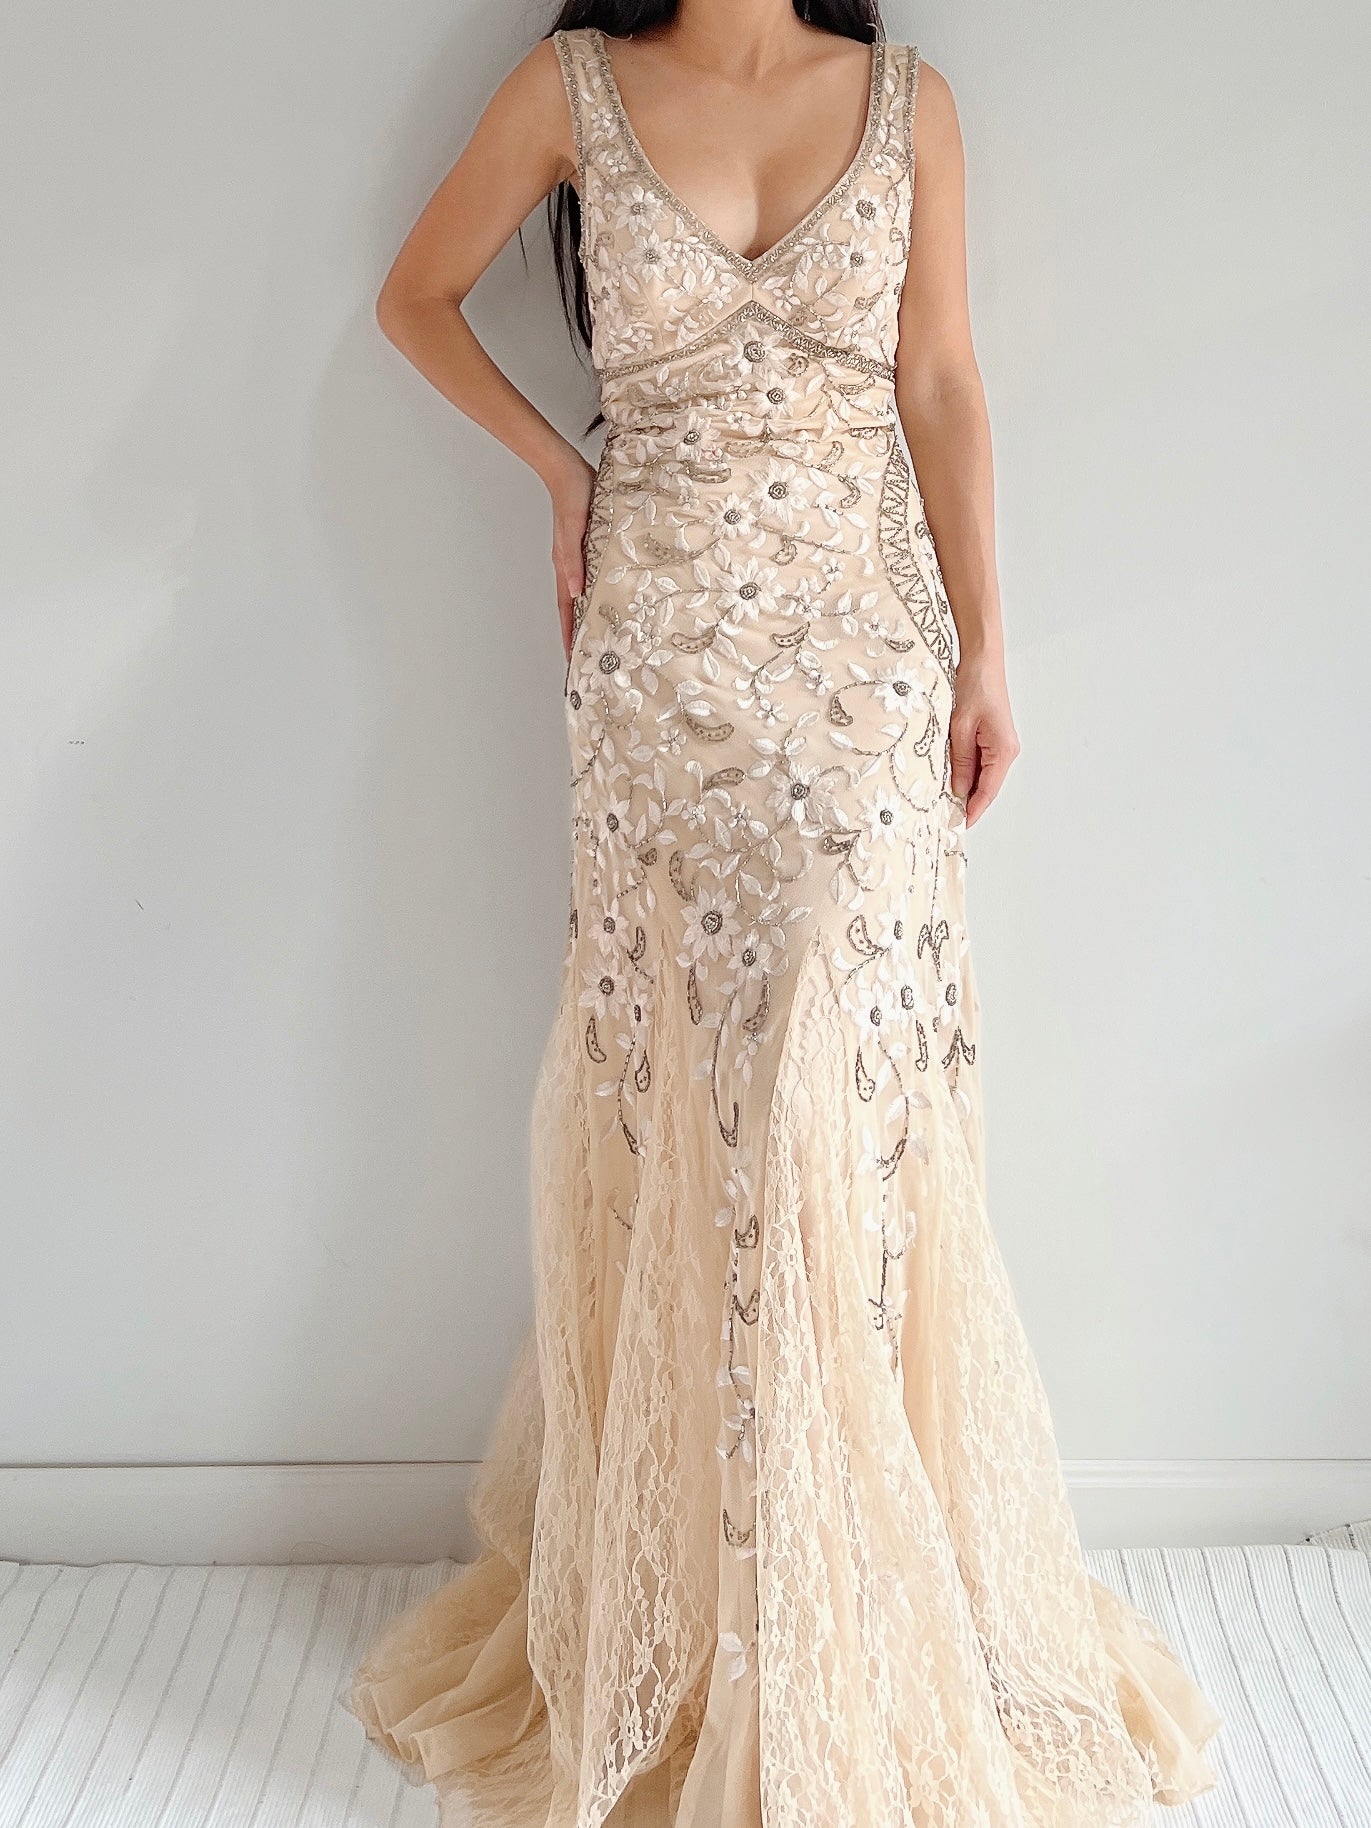 Vintage Embroidered Lace Gown - M